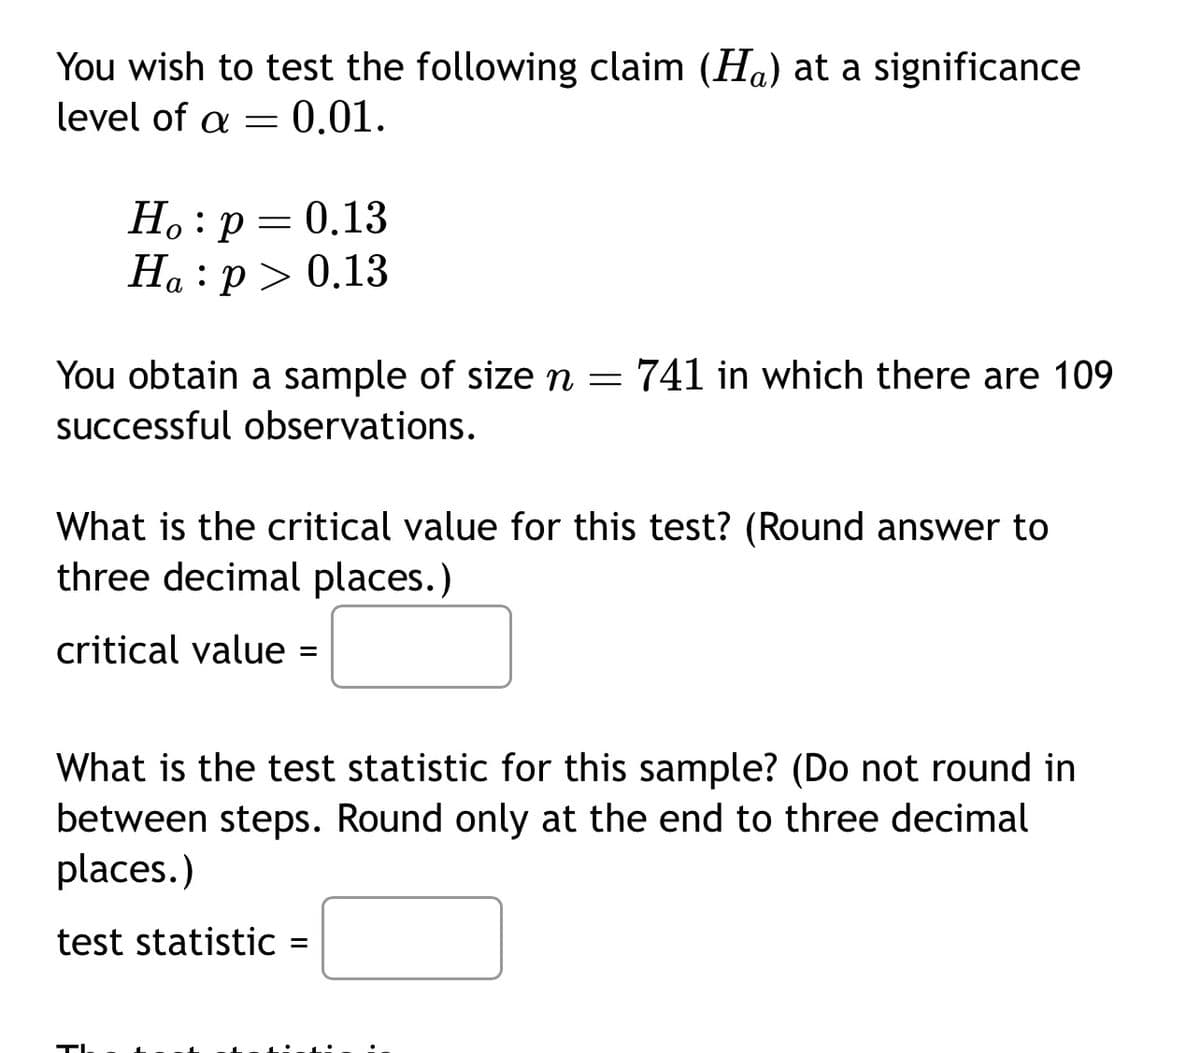 You wish to test the following claim (H) at a significance
level of a = ¤ 0.01.
Ho: p = 0.13
Ha:p> 0.13
You obtain a sample of size n = 741 in which there are 109
successful observations.
What is the critical value for this test? (Round answer to
three decimal places.)
critical value: =
What is the test statistic for this sample? (Do not round in
between steps. Round only at the end to three decimal
places.)
test statistic
=